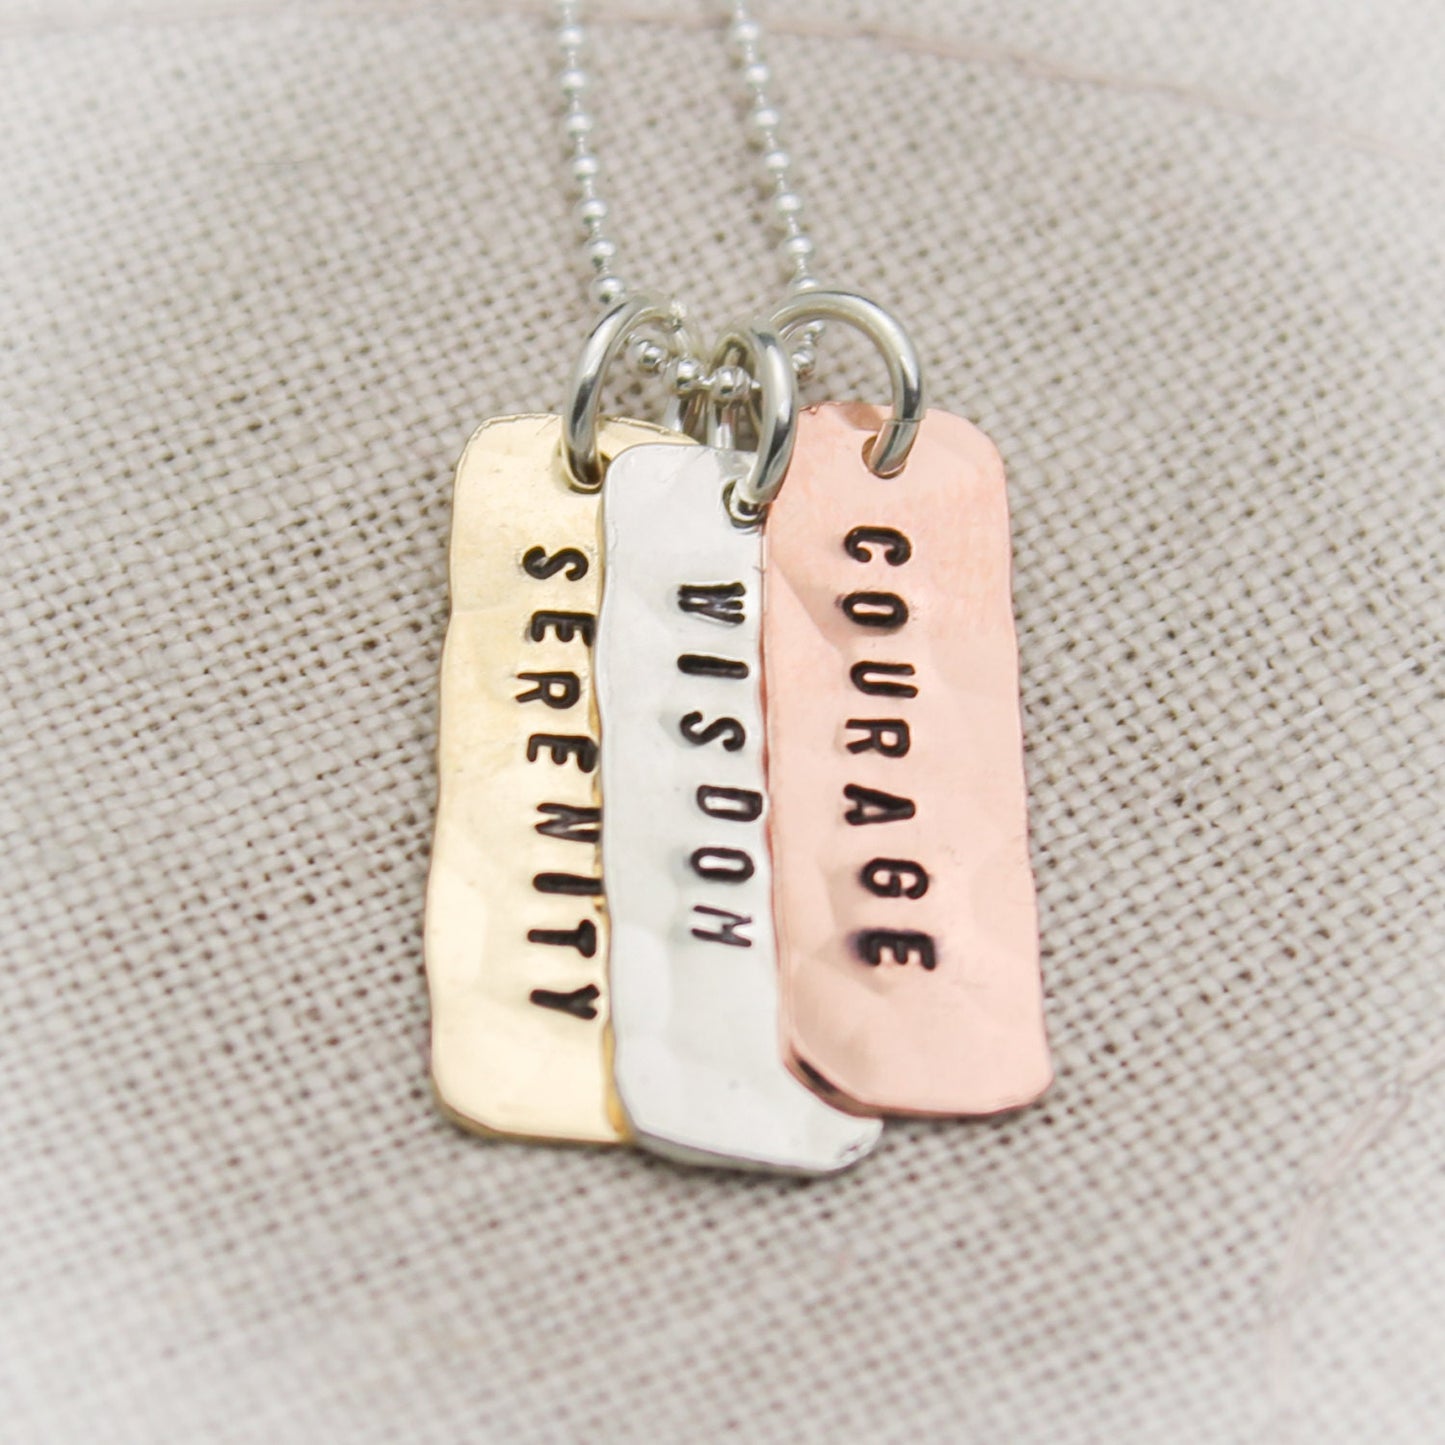 Serenity Prayer Necklace  Mixed Metals Tiny Copper Brass Silver Tags Hand Stamped Jewelry